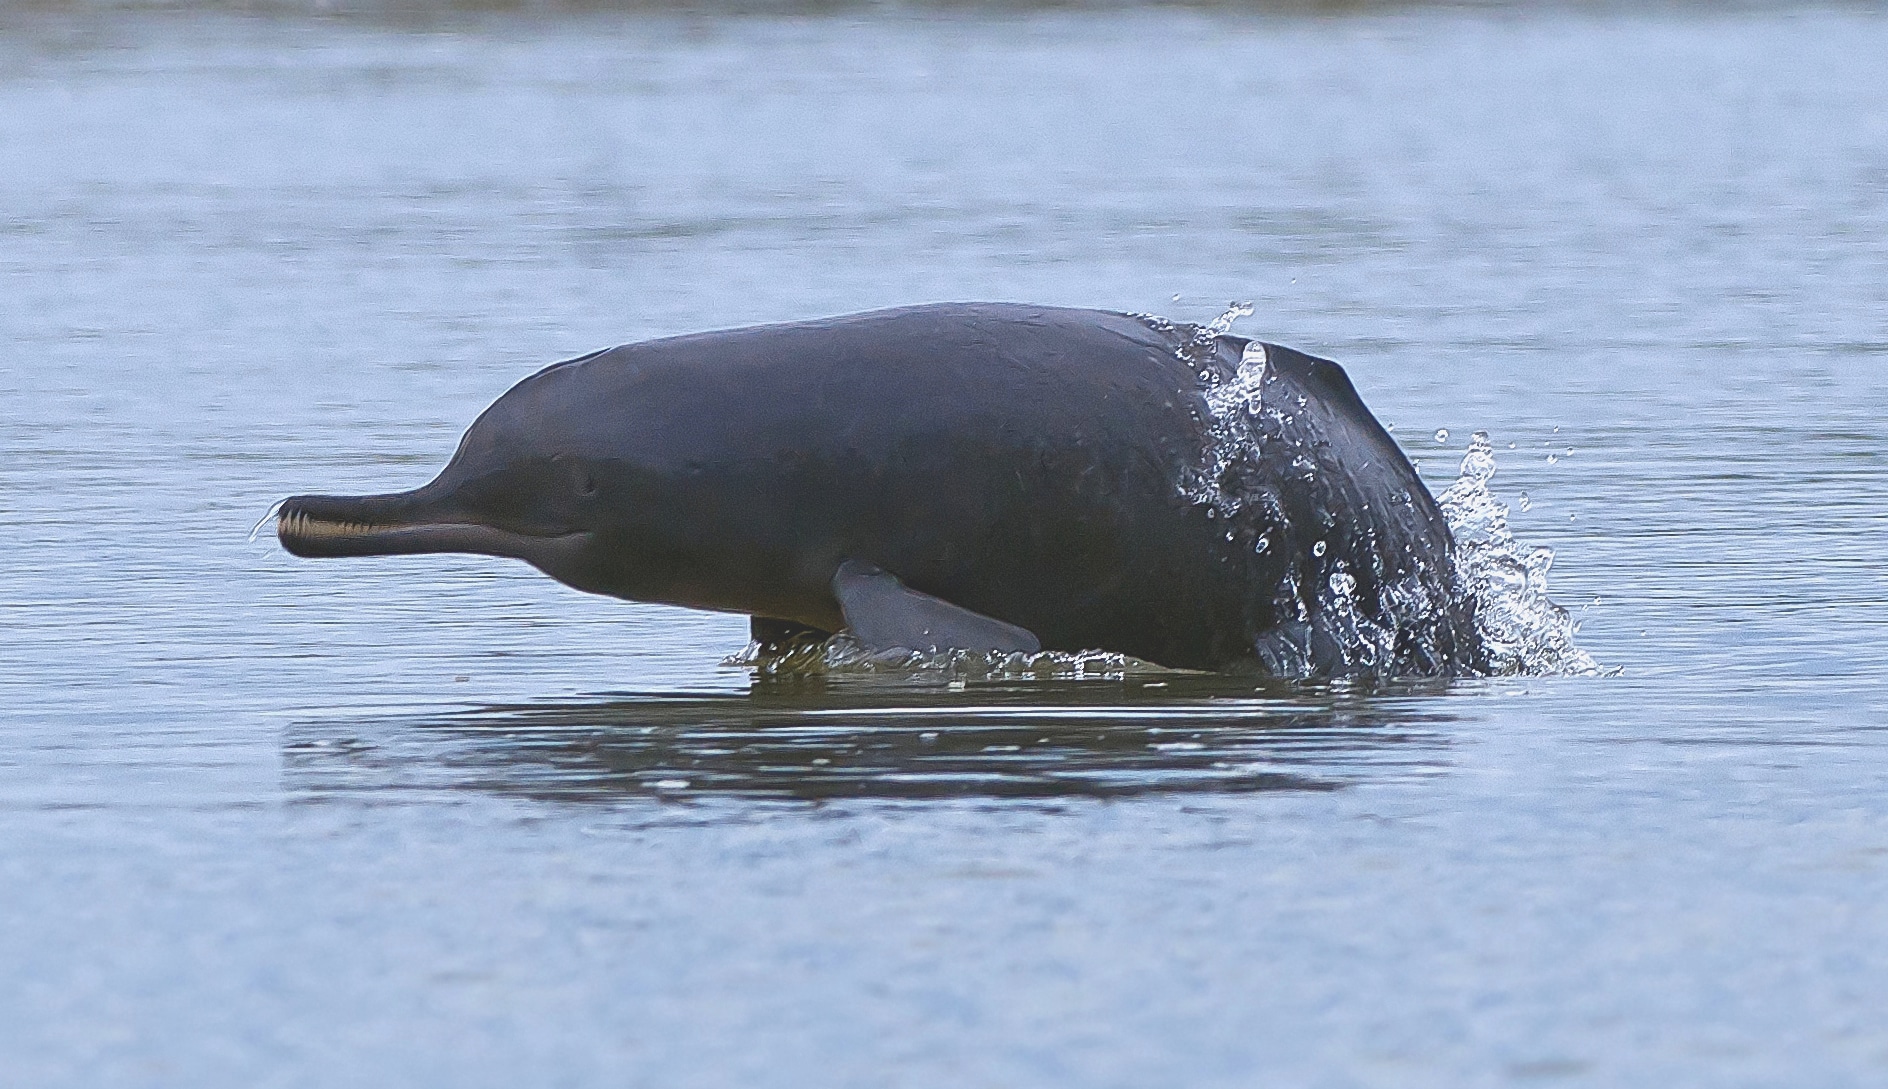 Where can you find the South Asian river dolphin?